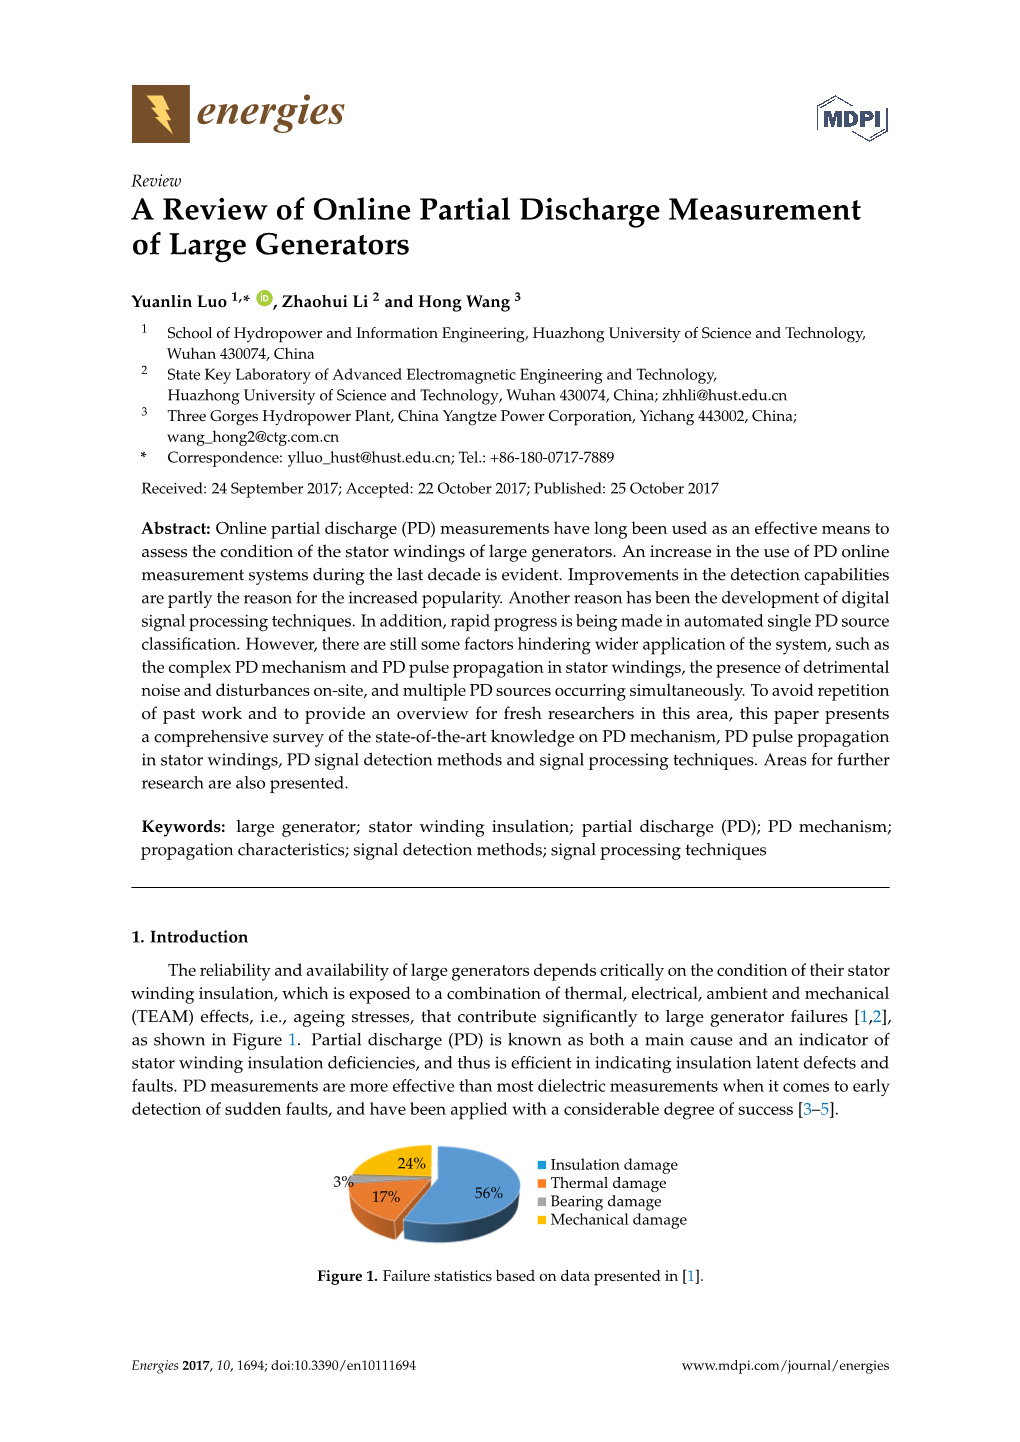 A Review of Online Partial Discharge Measurement of Large Generators